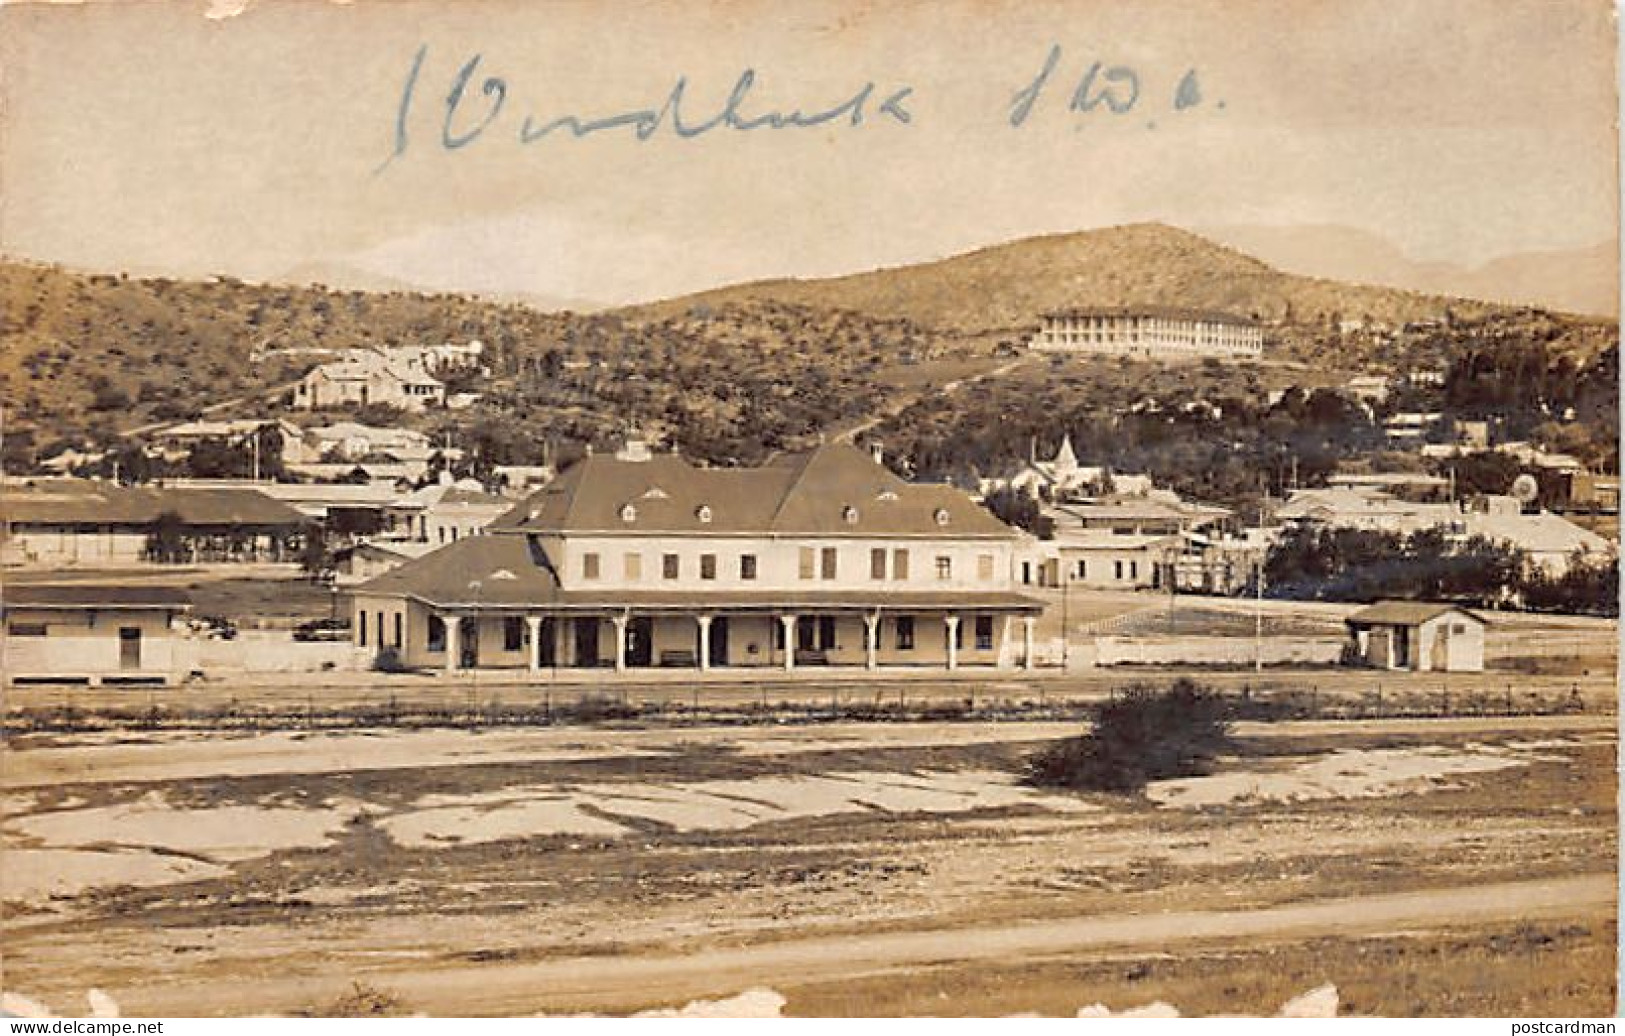 Namibia - WINDHOEK Windhuk - The Railway Station - REAL PHOTO - Publ. Unknown  - Namibië